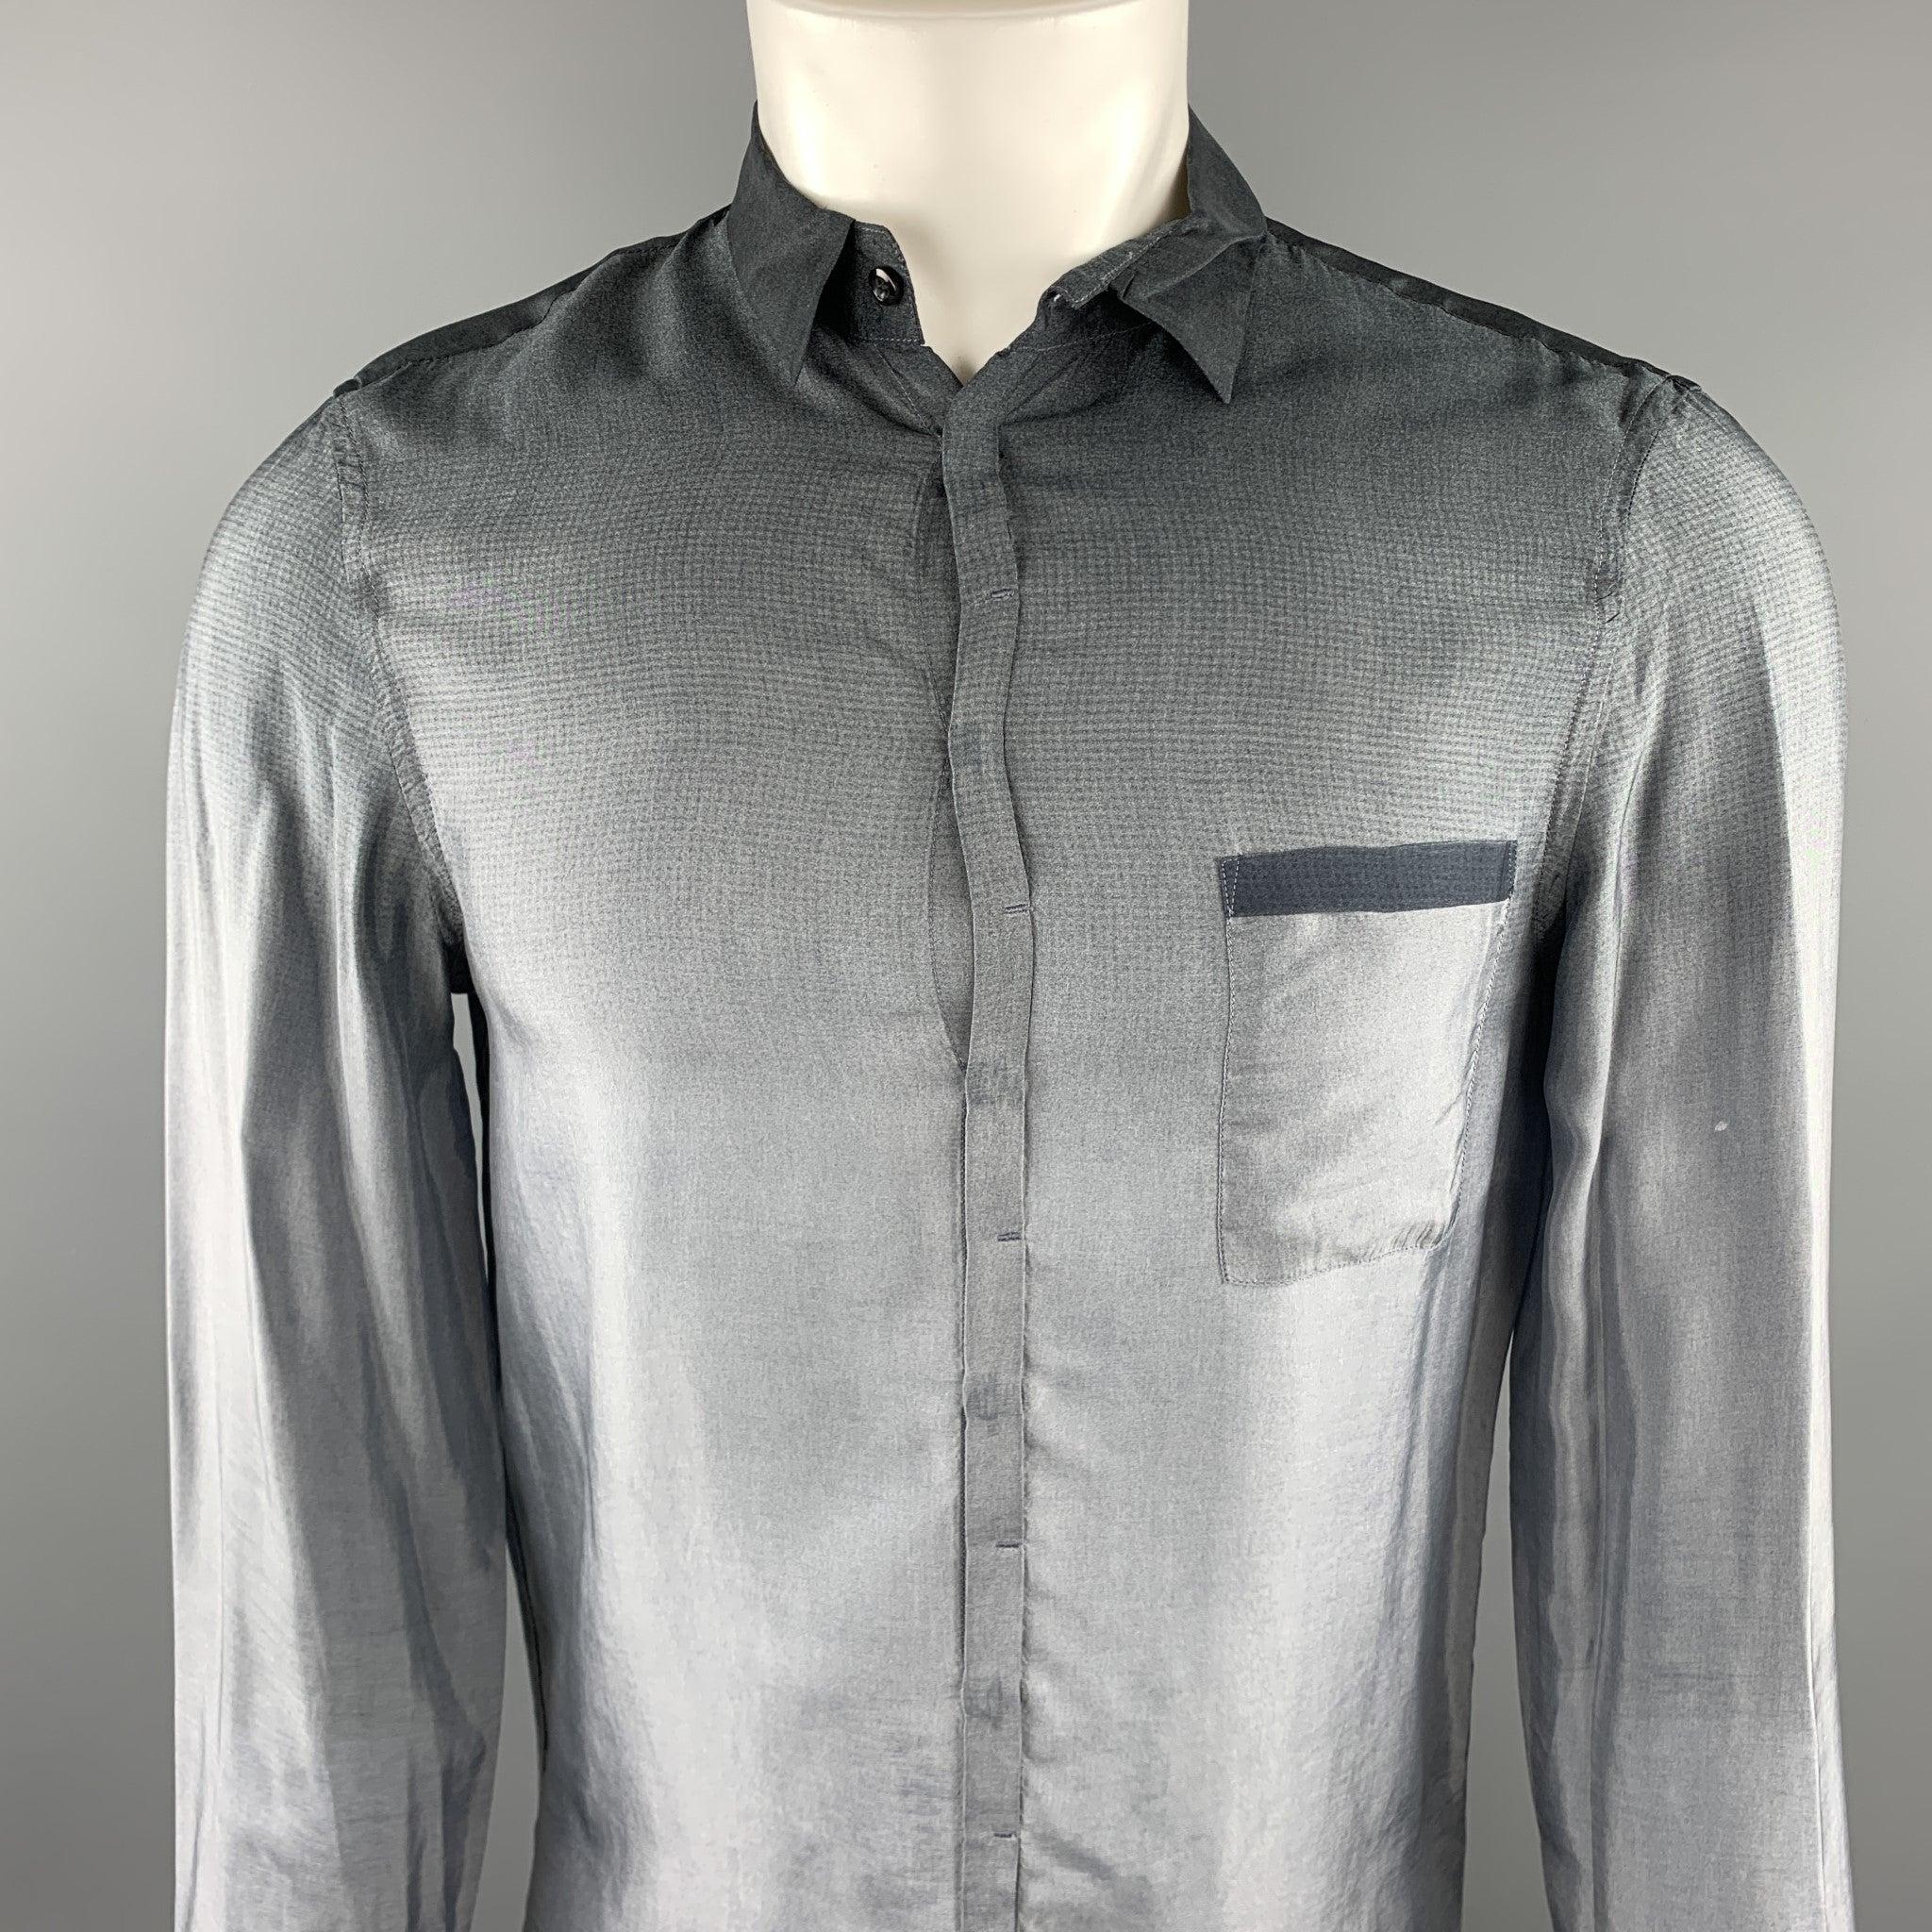 EMPORIO ARMANI long sleeve shirt comes in a gray ombre curpo featuring a spread collar, patch pocket, and a hidden button closure.Very Good
Pre-Owned Condition. 

Marked:   39/15.5 

Measurements: 
 
Shoulder: 15.5 inches Chest: 38 inches 
Sleeve: